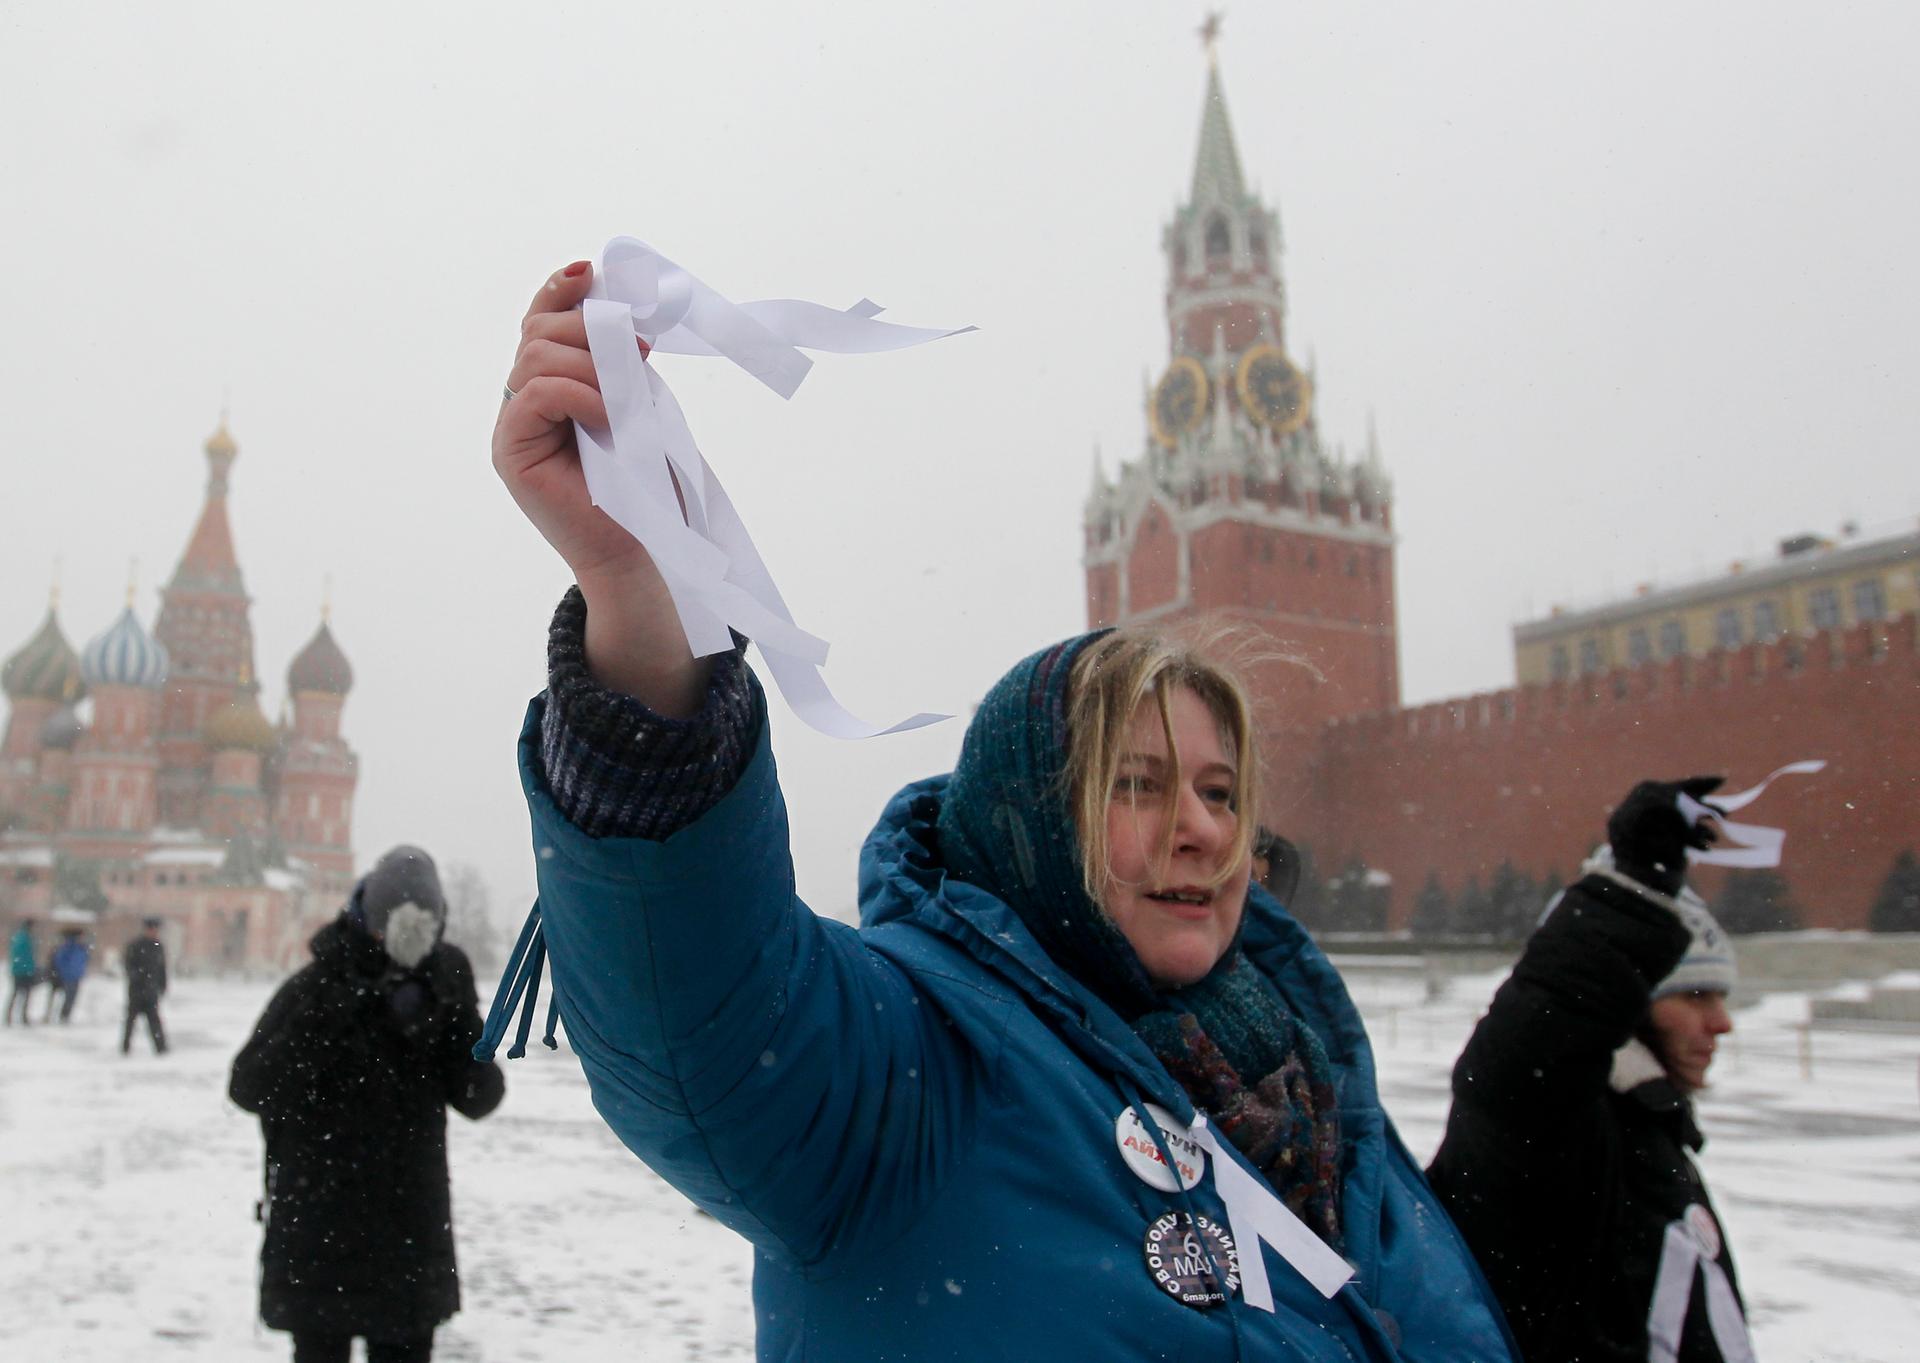 An activist holds white ribbons, the symbol of the opposition movement, during a protest  on Moscow's Red Square March 24, 2013. The action was organised to show solidarity for these arrested at opposition rallies in May 2012.